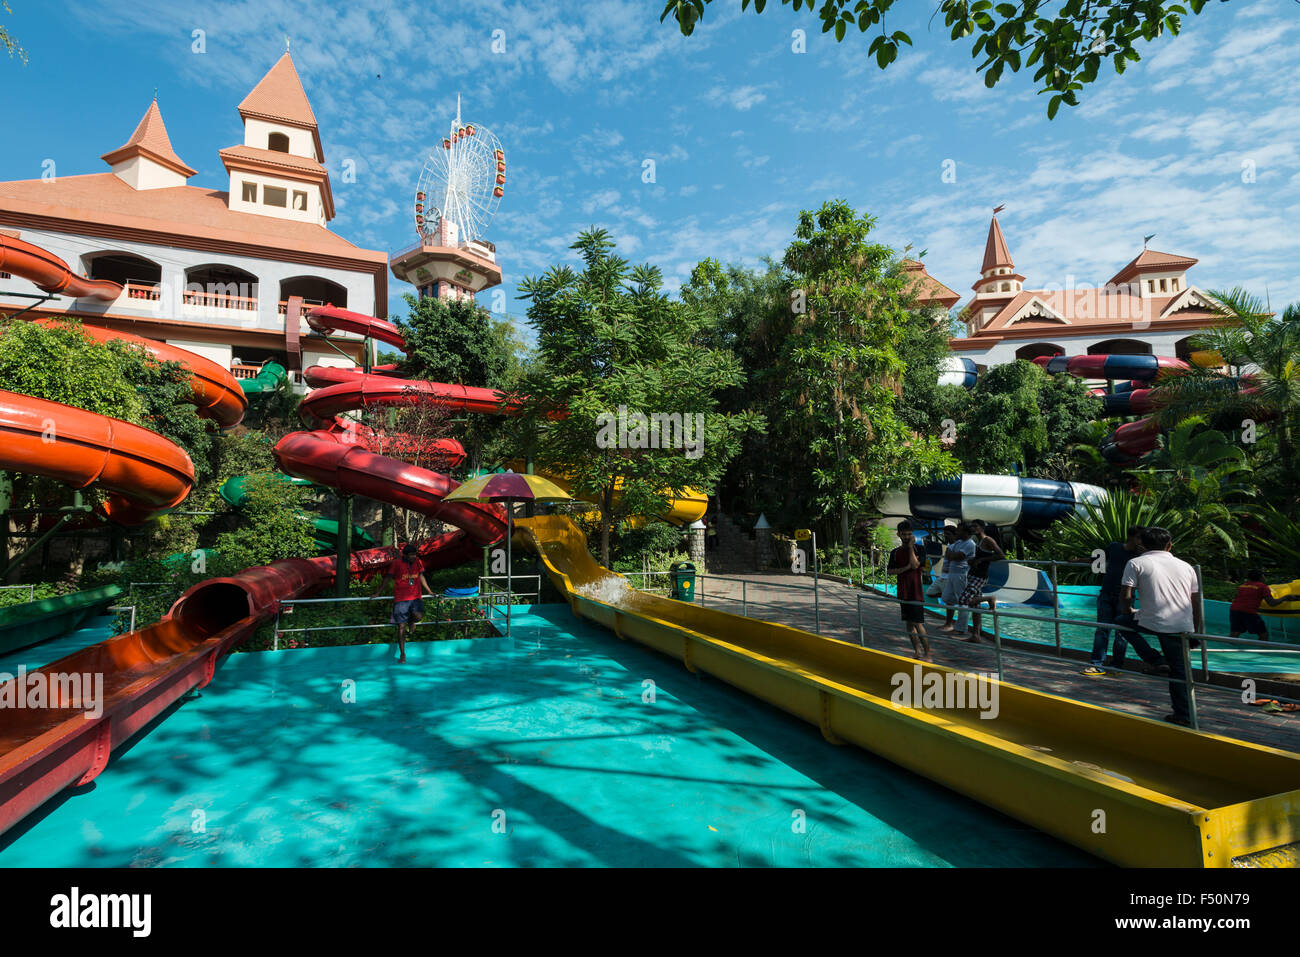 Part of Wonder La, the big amusement park outside of Bangalore. The park features a wide variety of attractions including some r Stock Photo